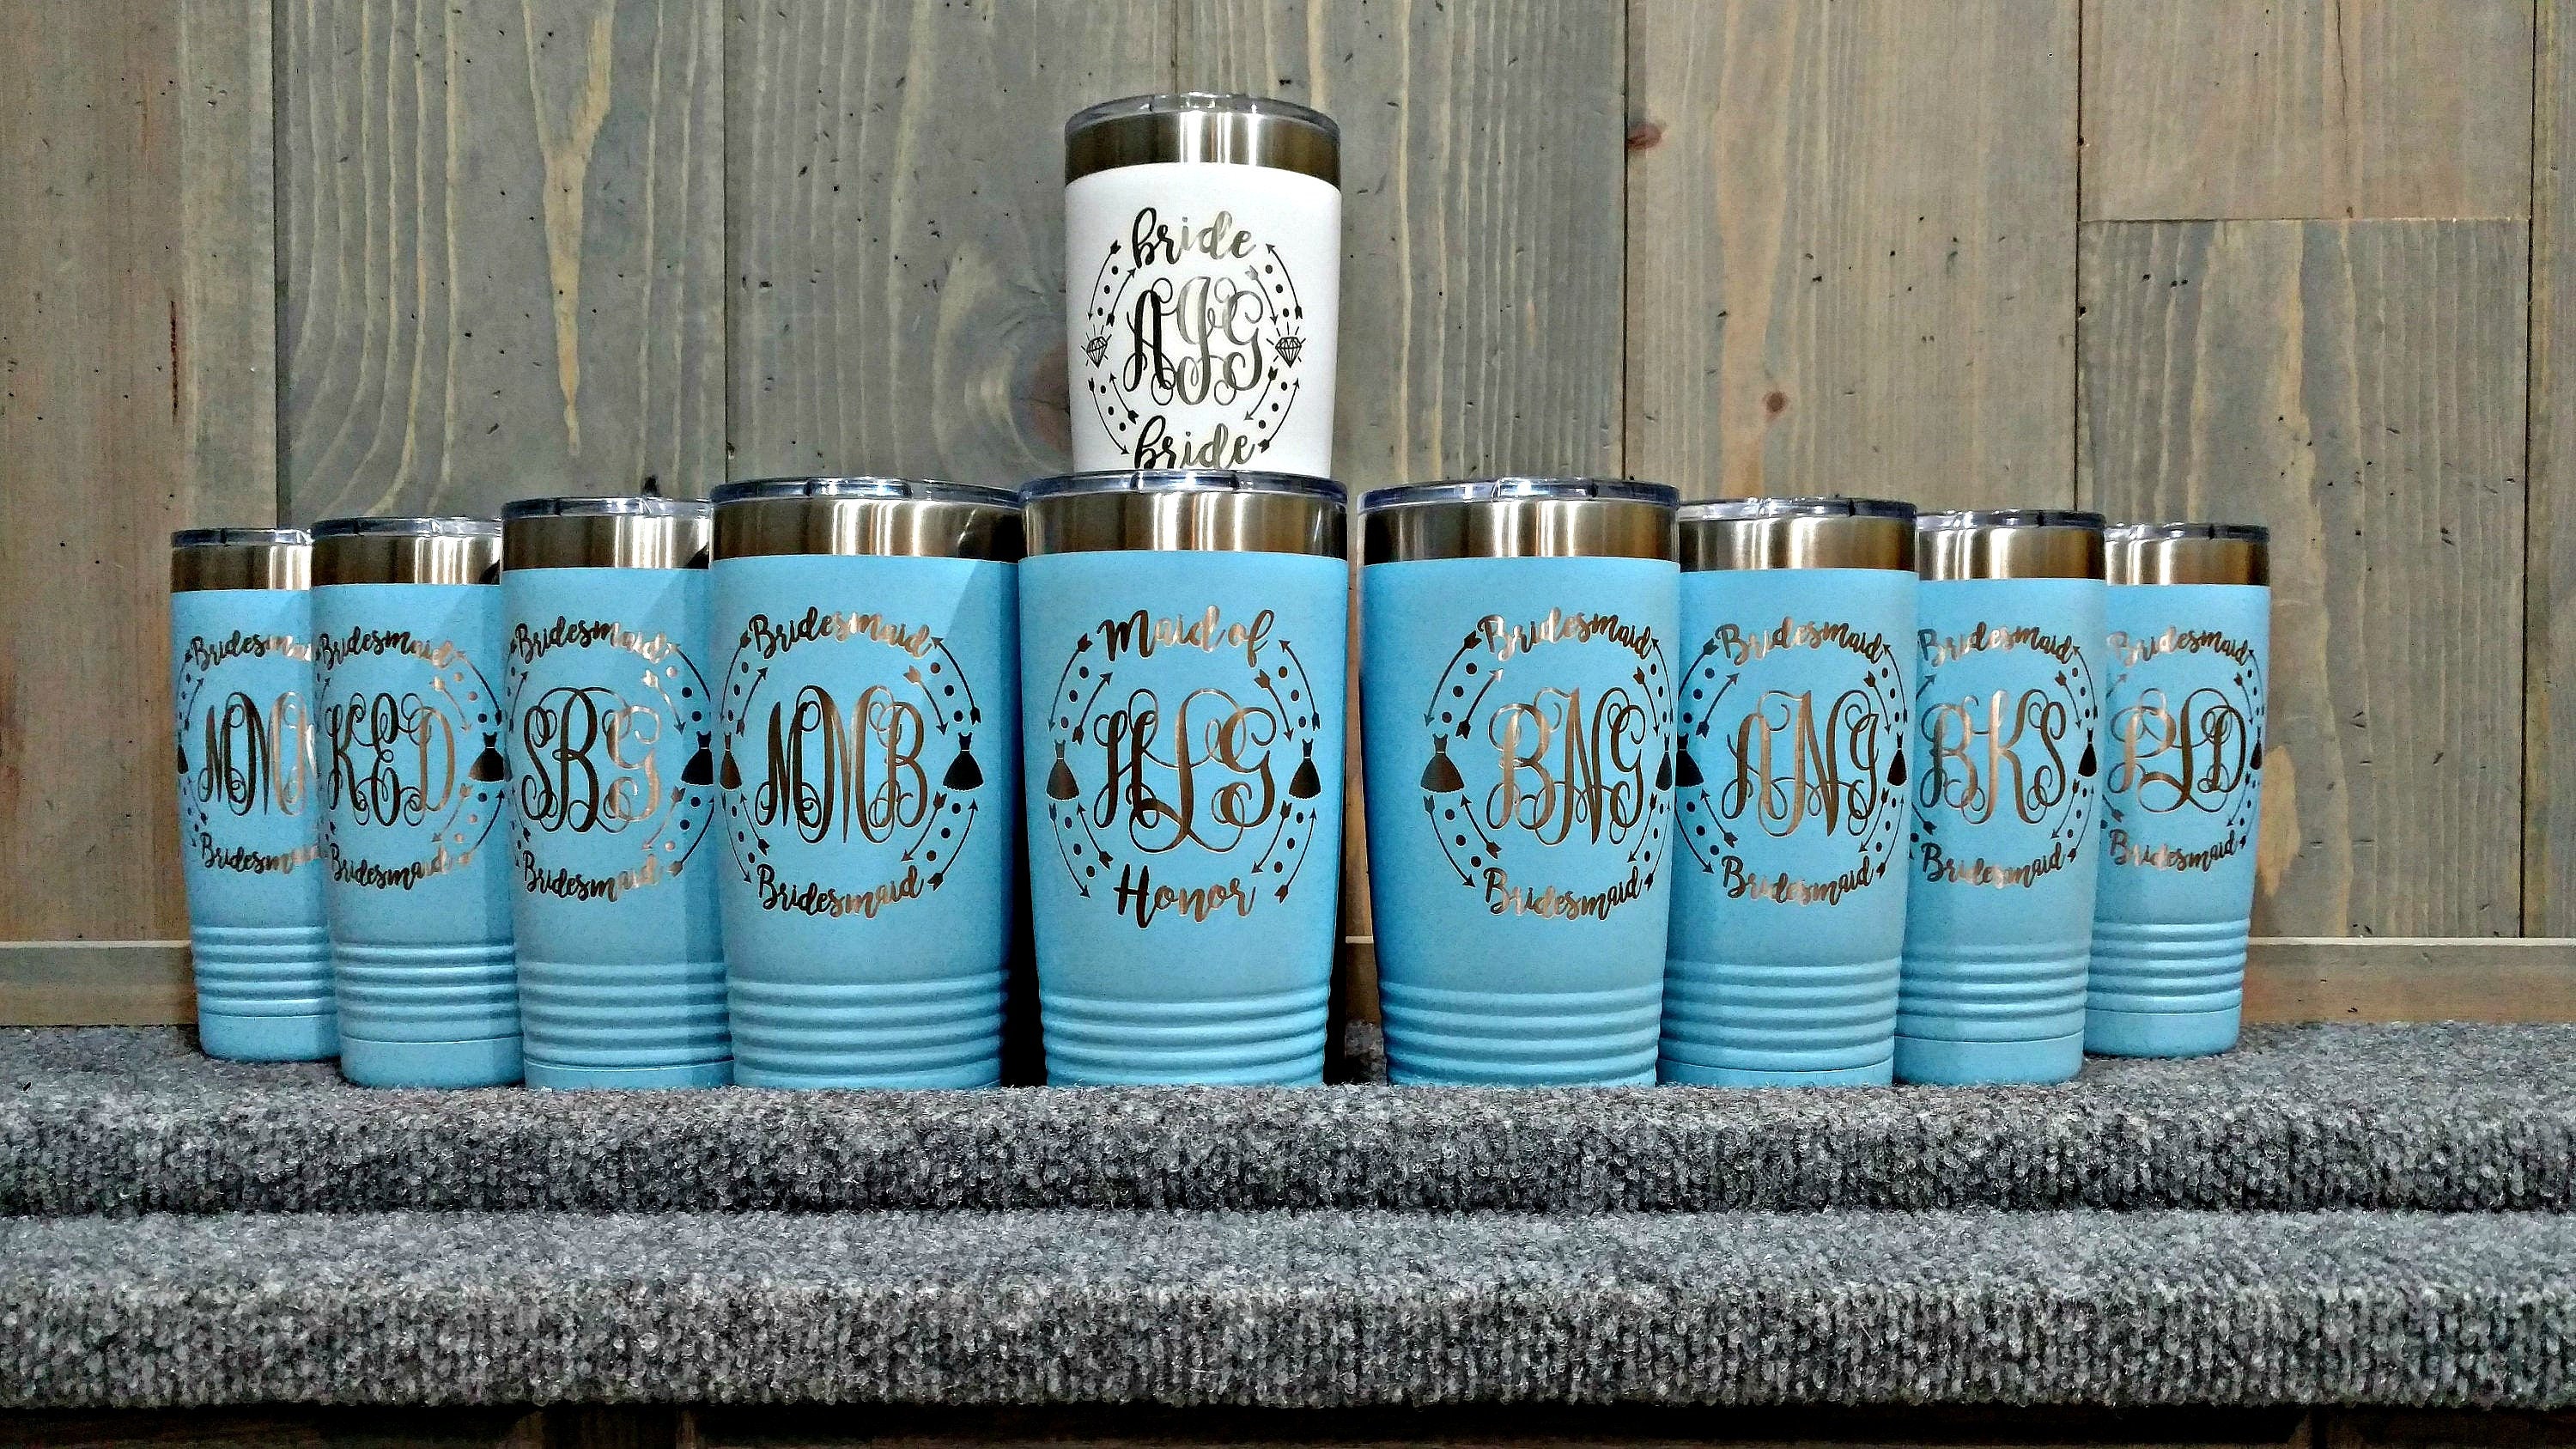 engraved travel mugs for sale